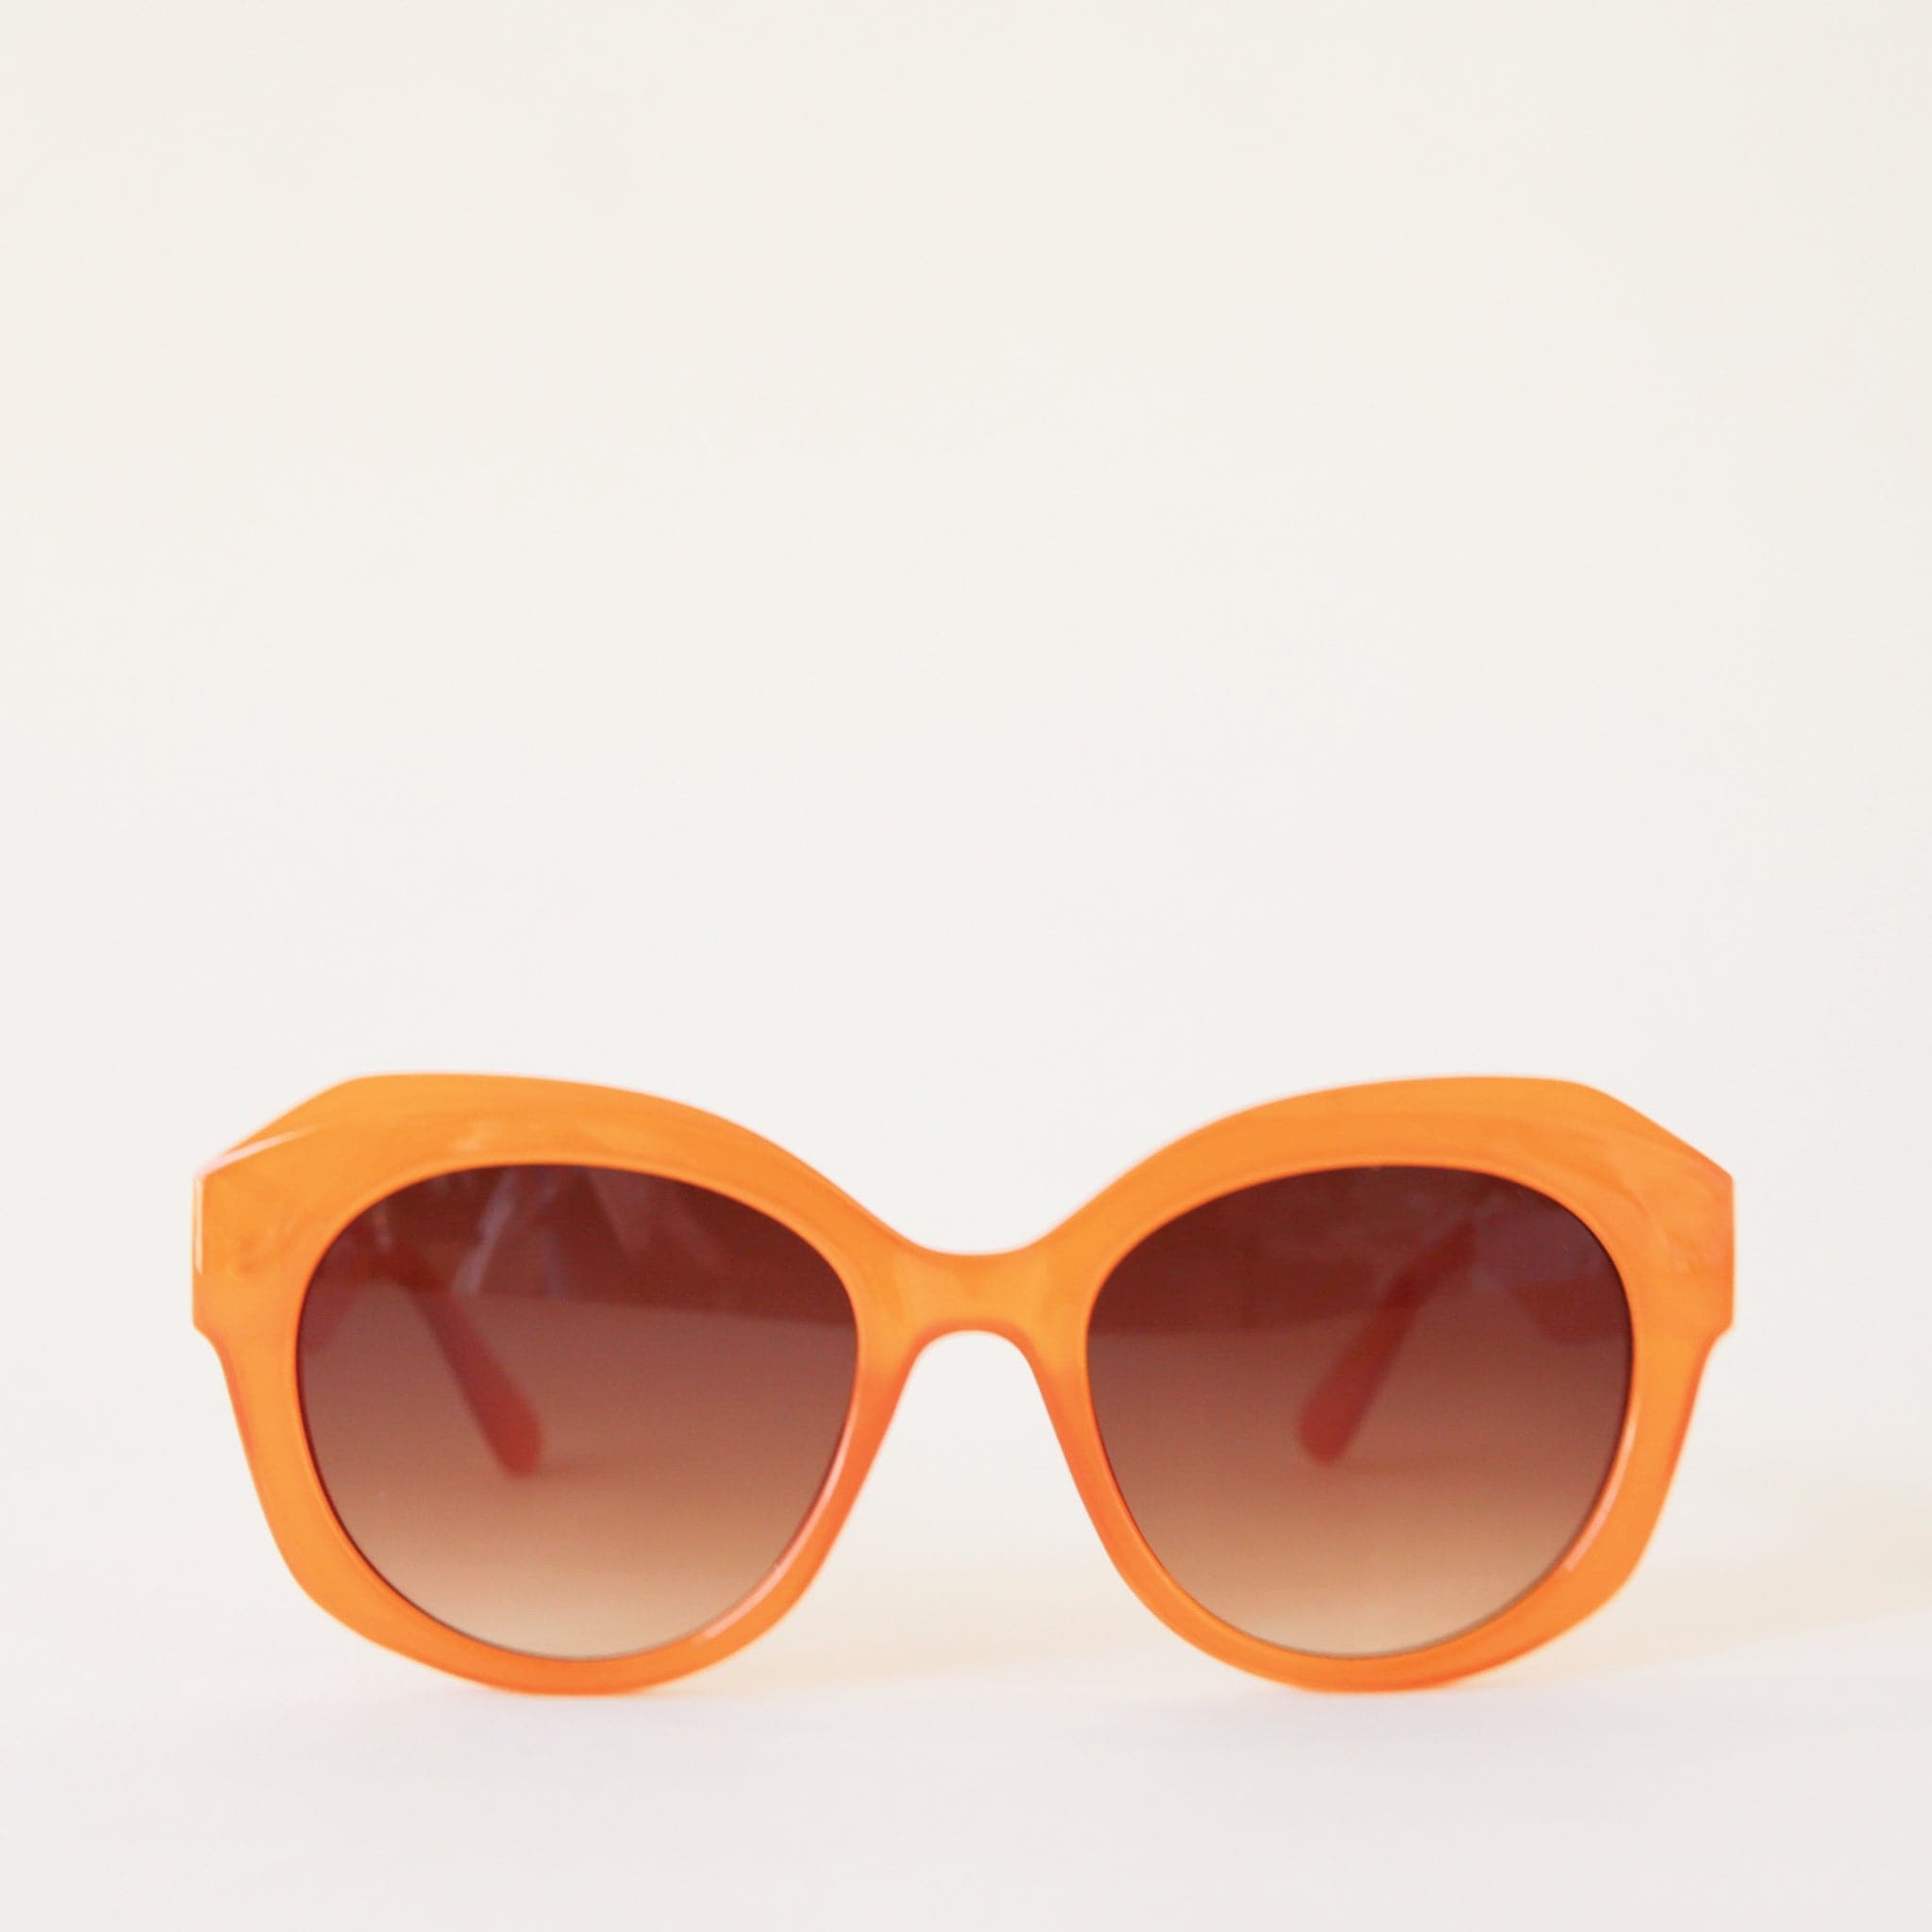 Chunky round orange sunglasses with a brown lens.